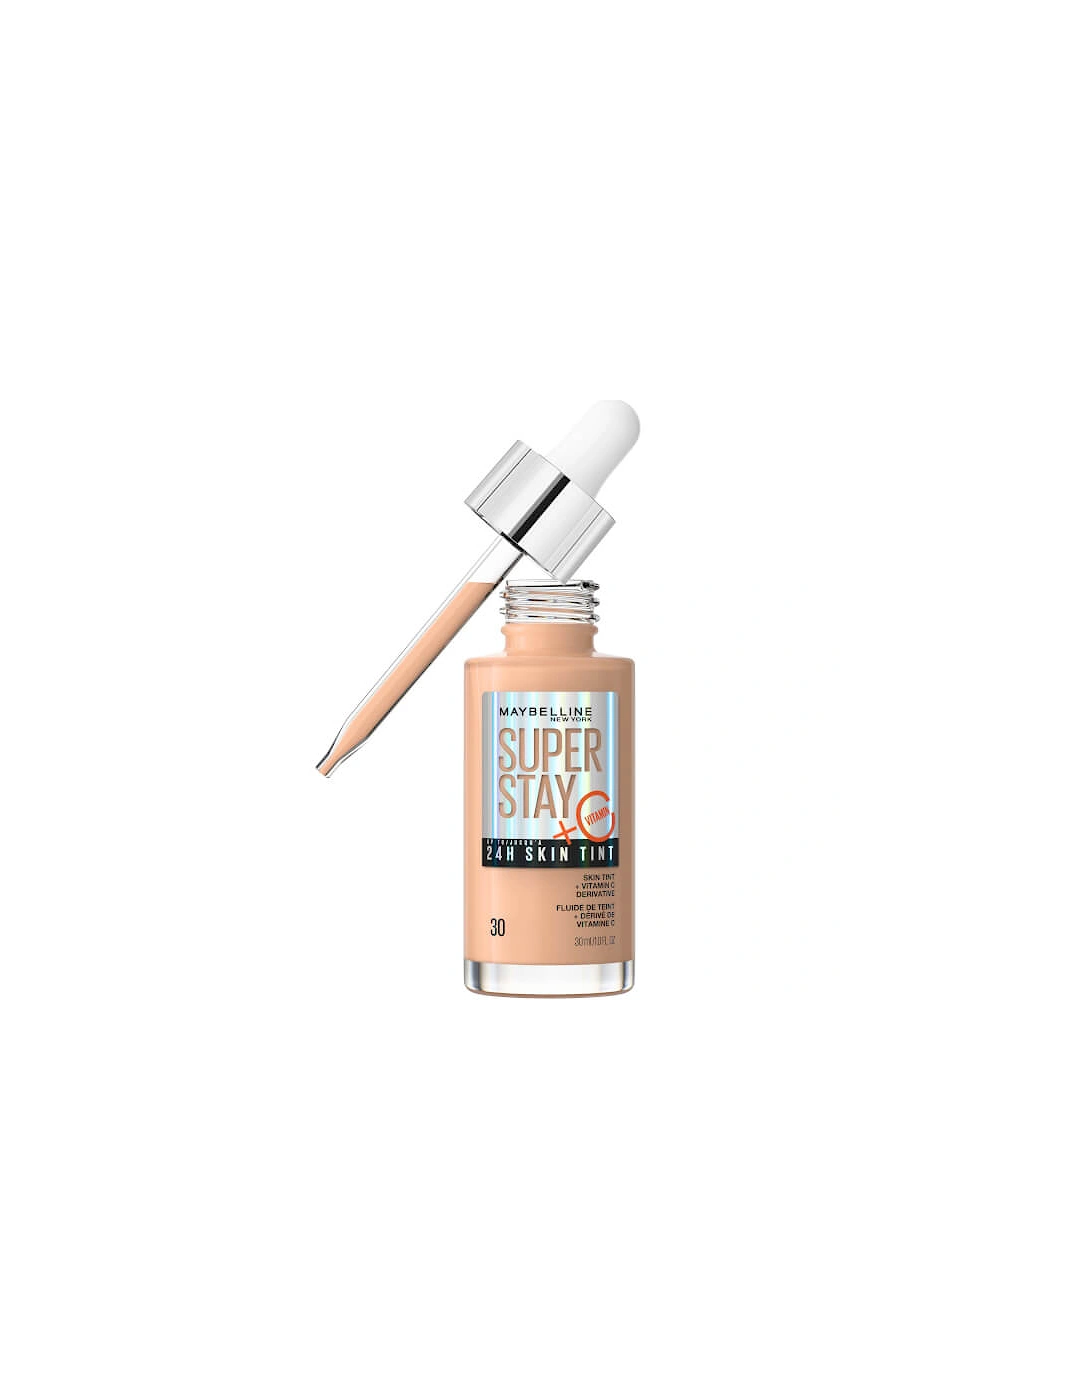 Super Stay up to 24H Skin Tint Foundation + Vitamin C - Shade 30, 2 of 1